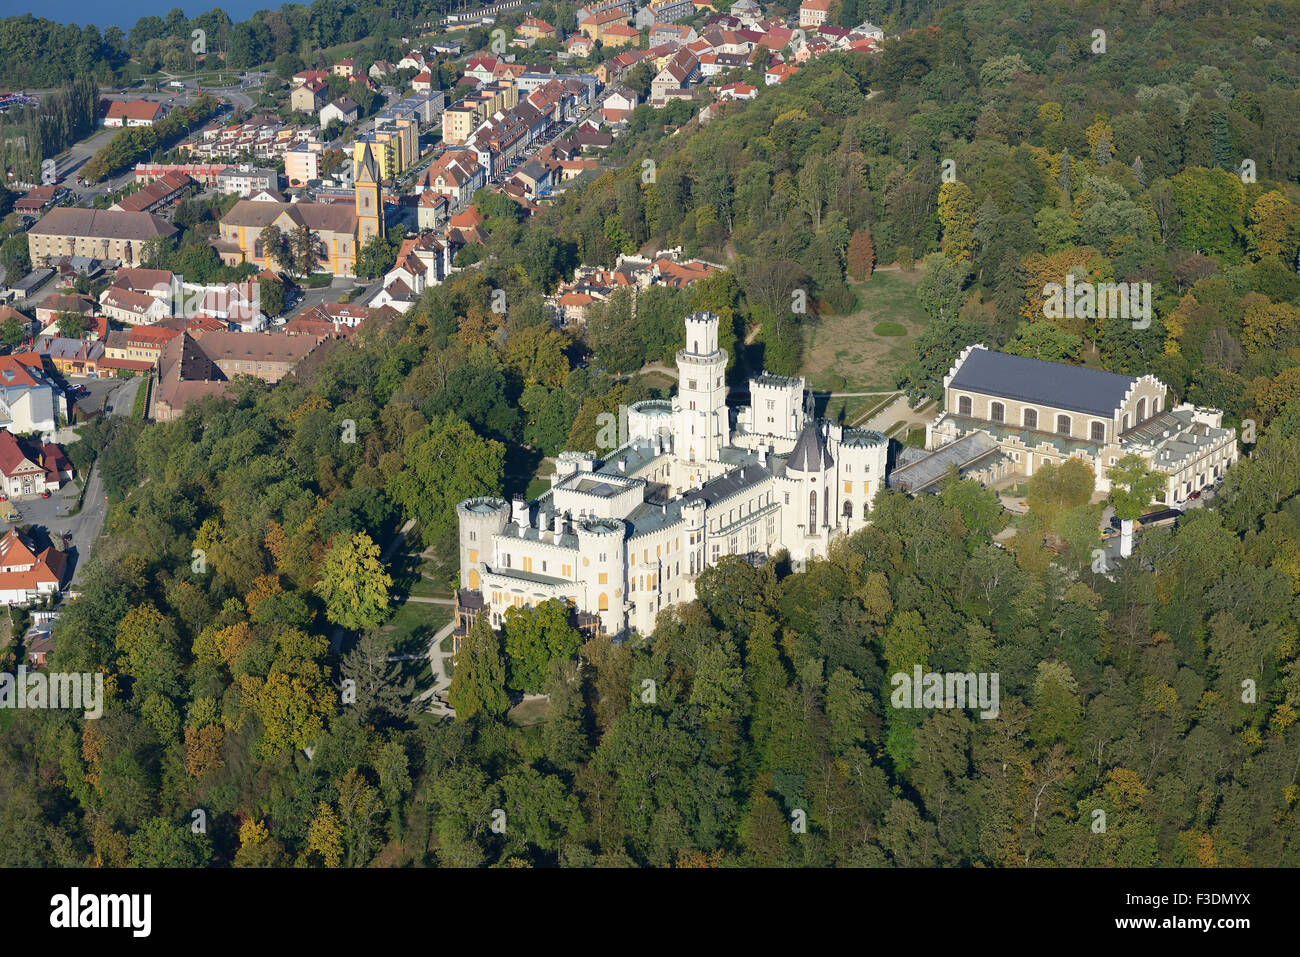 AERIAL VIEW. Hluboká Castle overlooking the medieval town of Hluboká Nad Vltavou. Bohemia, Czech Republic. Stock Photo